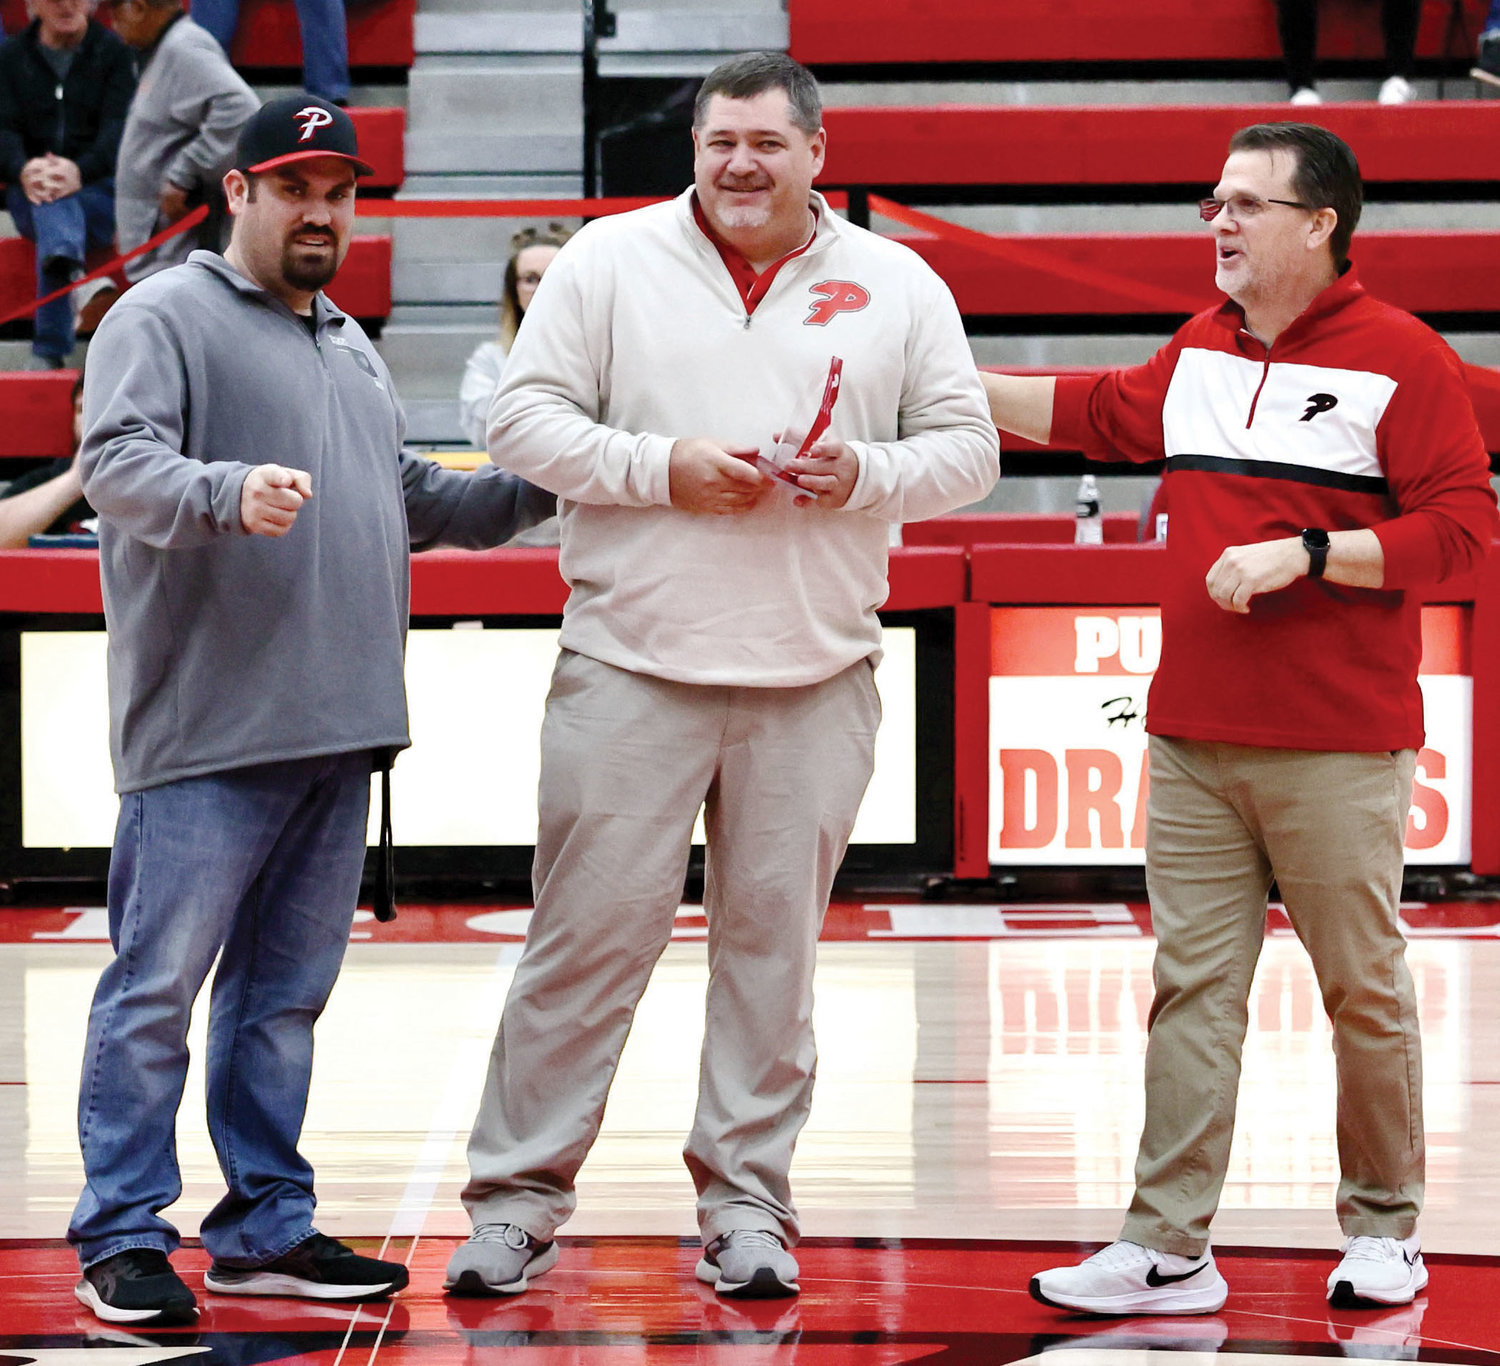 Paul Wollenberg was honored Friday night for his 26 years of coaching Purcell athletics. Wollenberg has coached basketball, softball, baseball and football at both the high school and junior high levels over his career at Purcell. Making the presentation were athletic director Ricky Hammer, left, and boy’s basketball coach Roger Raper